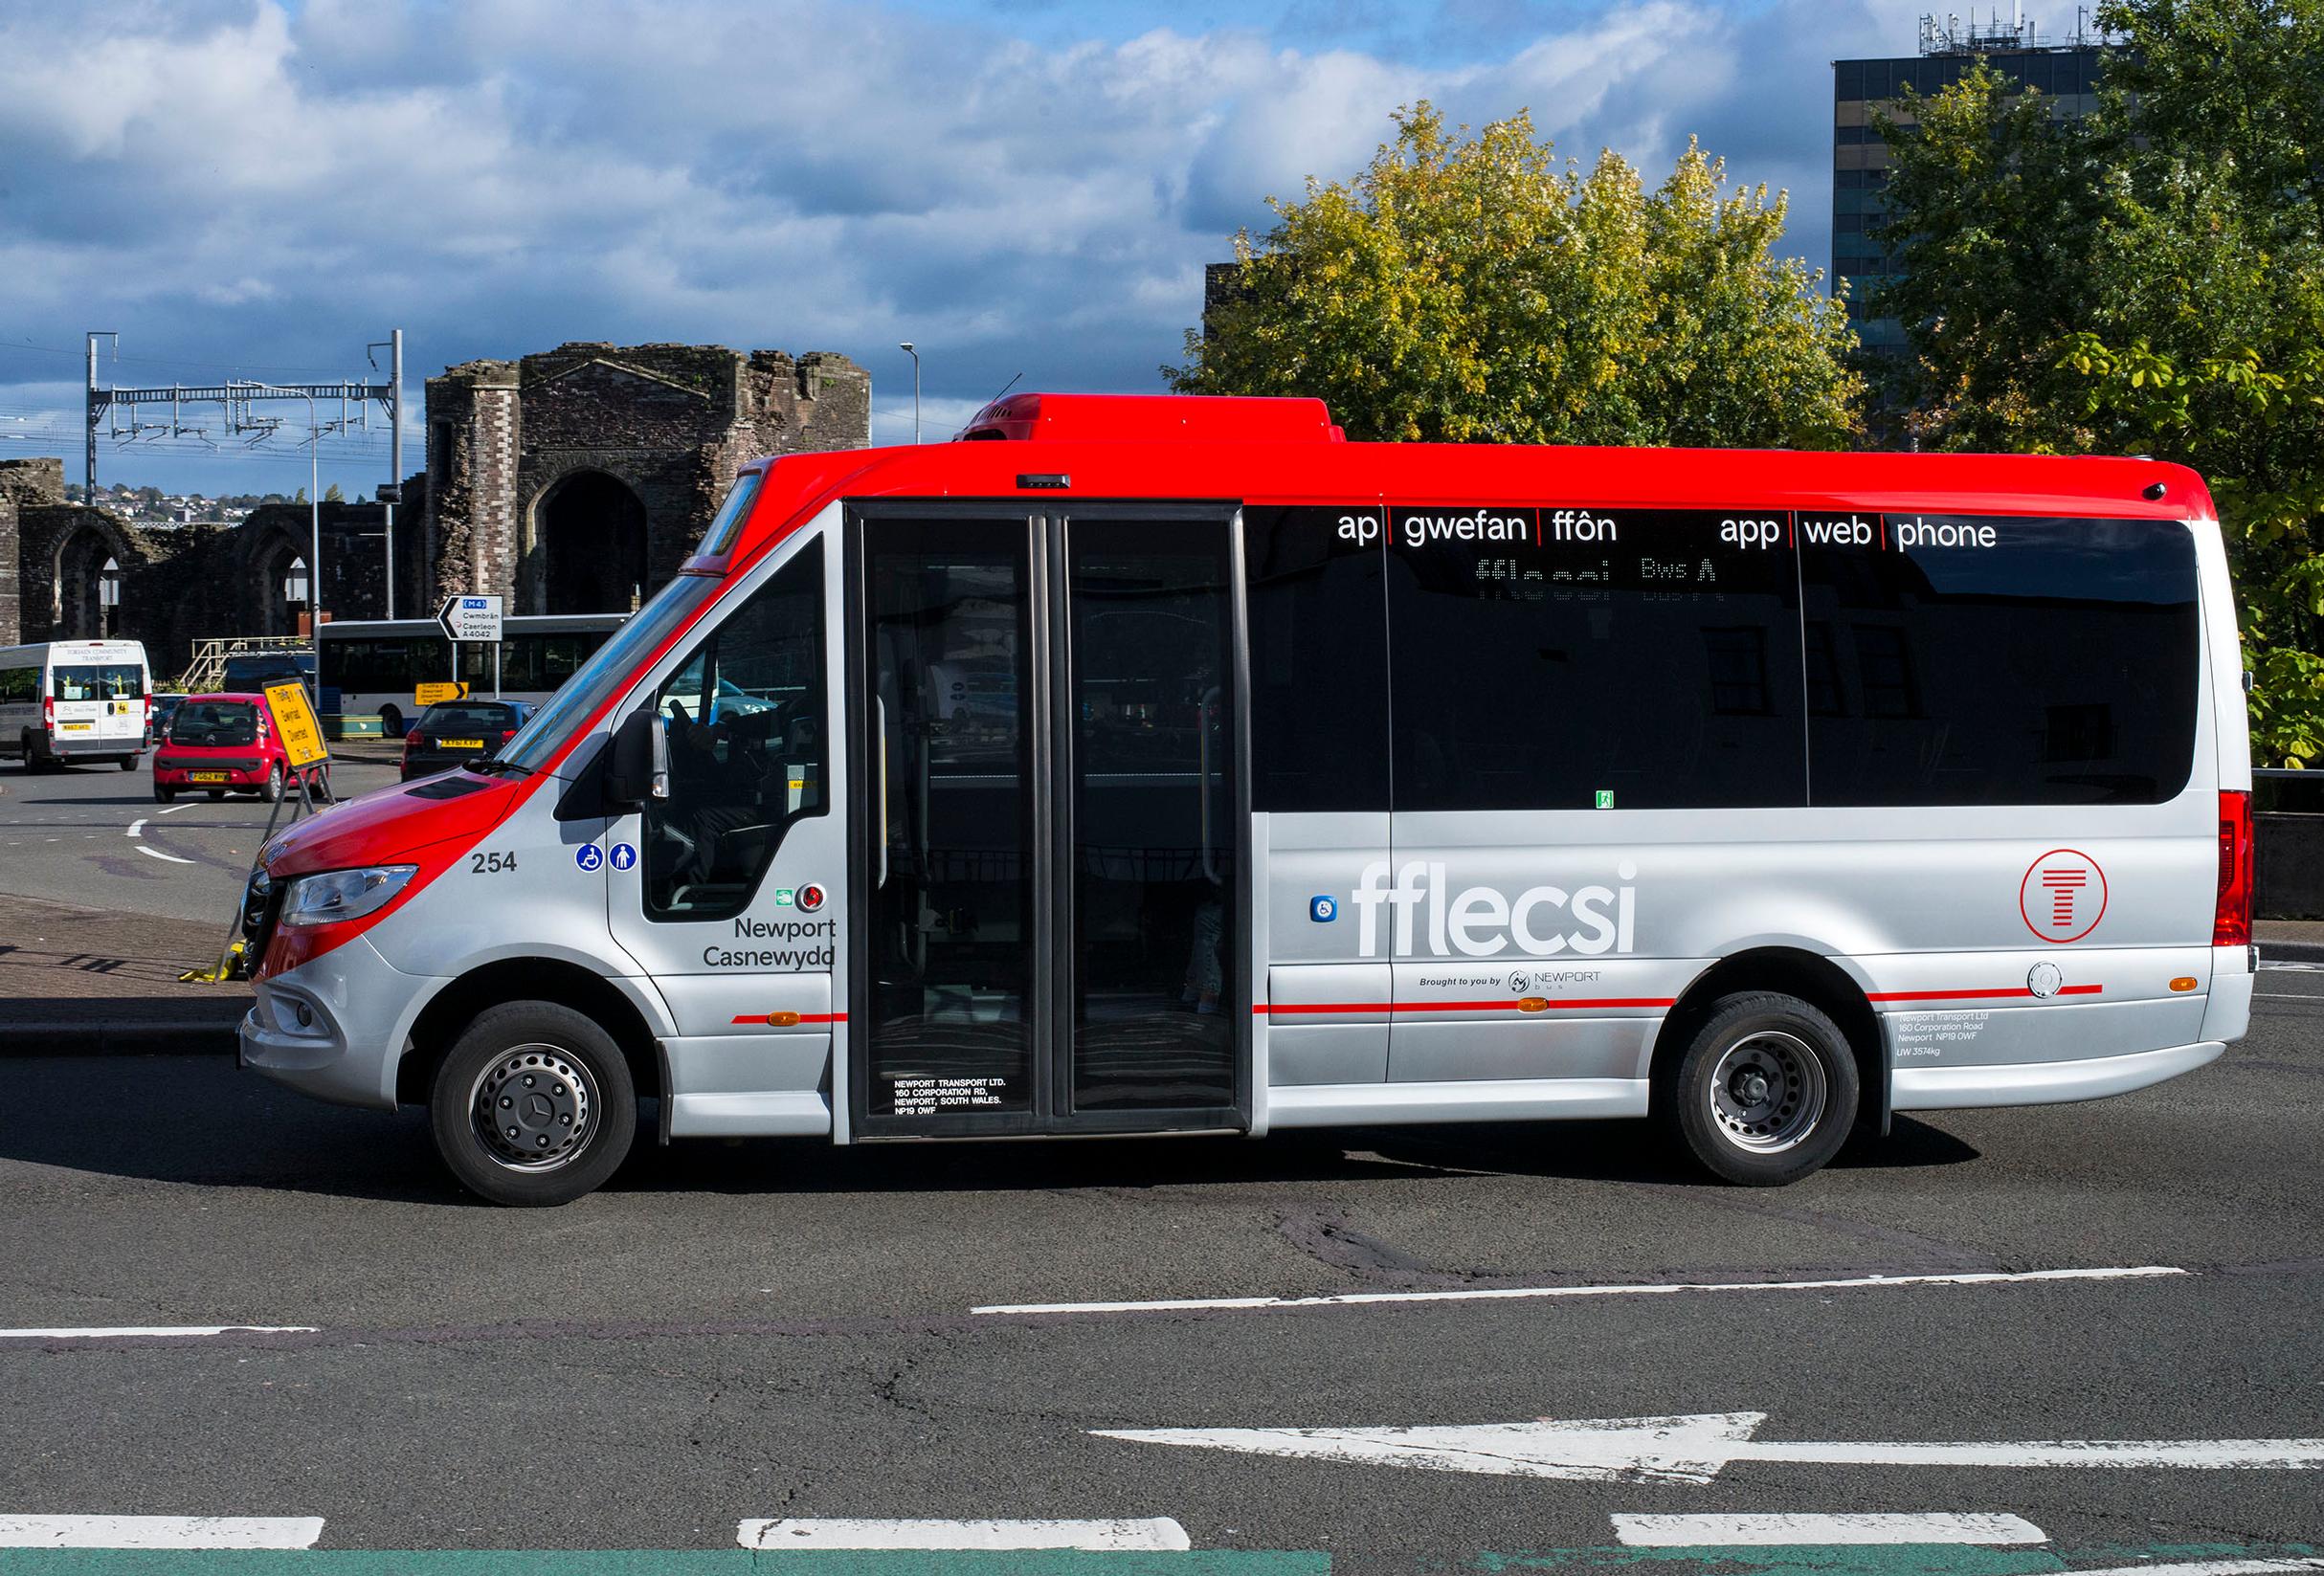 fflecsi can make some bus journeys in Newport less complex, provided the passenger thinks to consult the fflecsi app